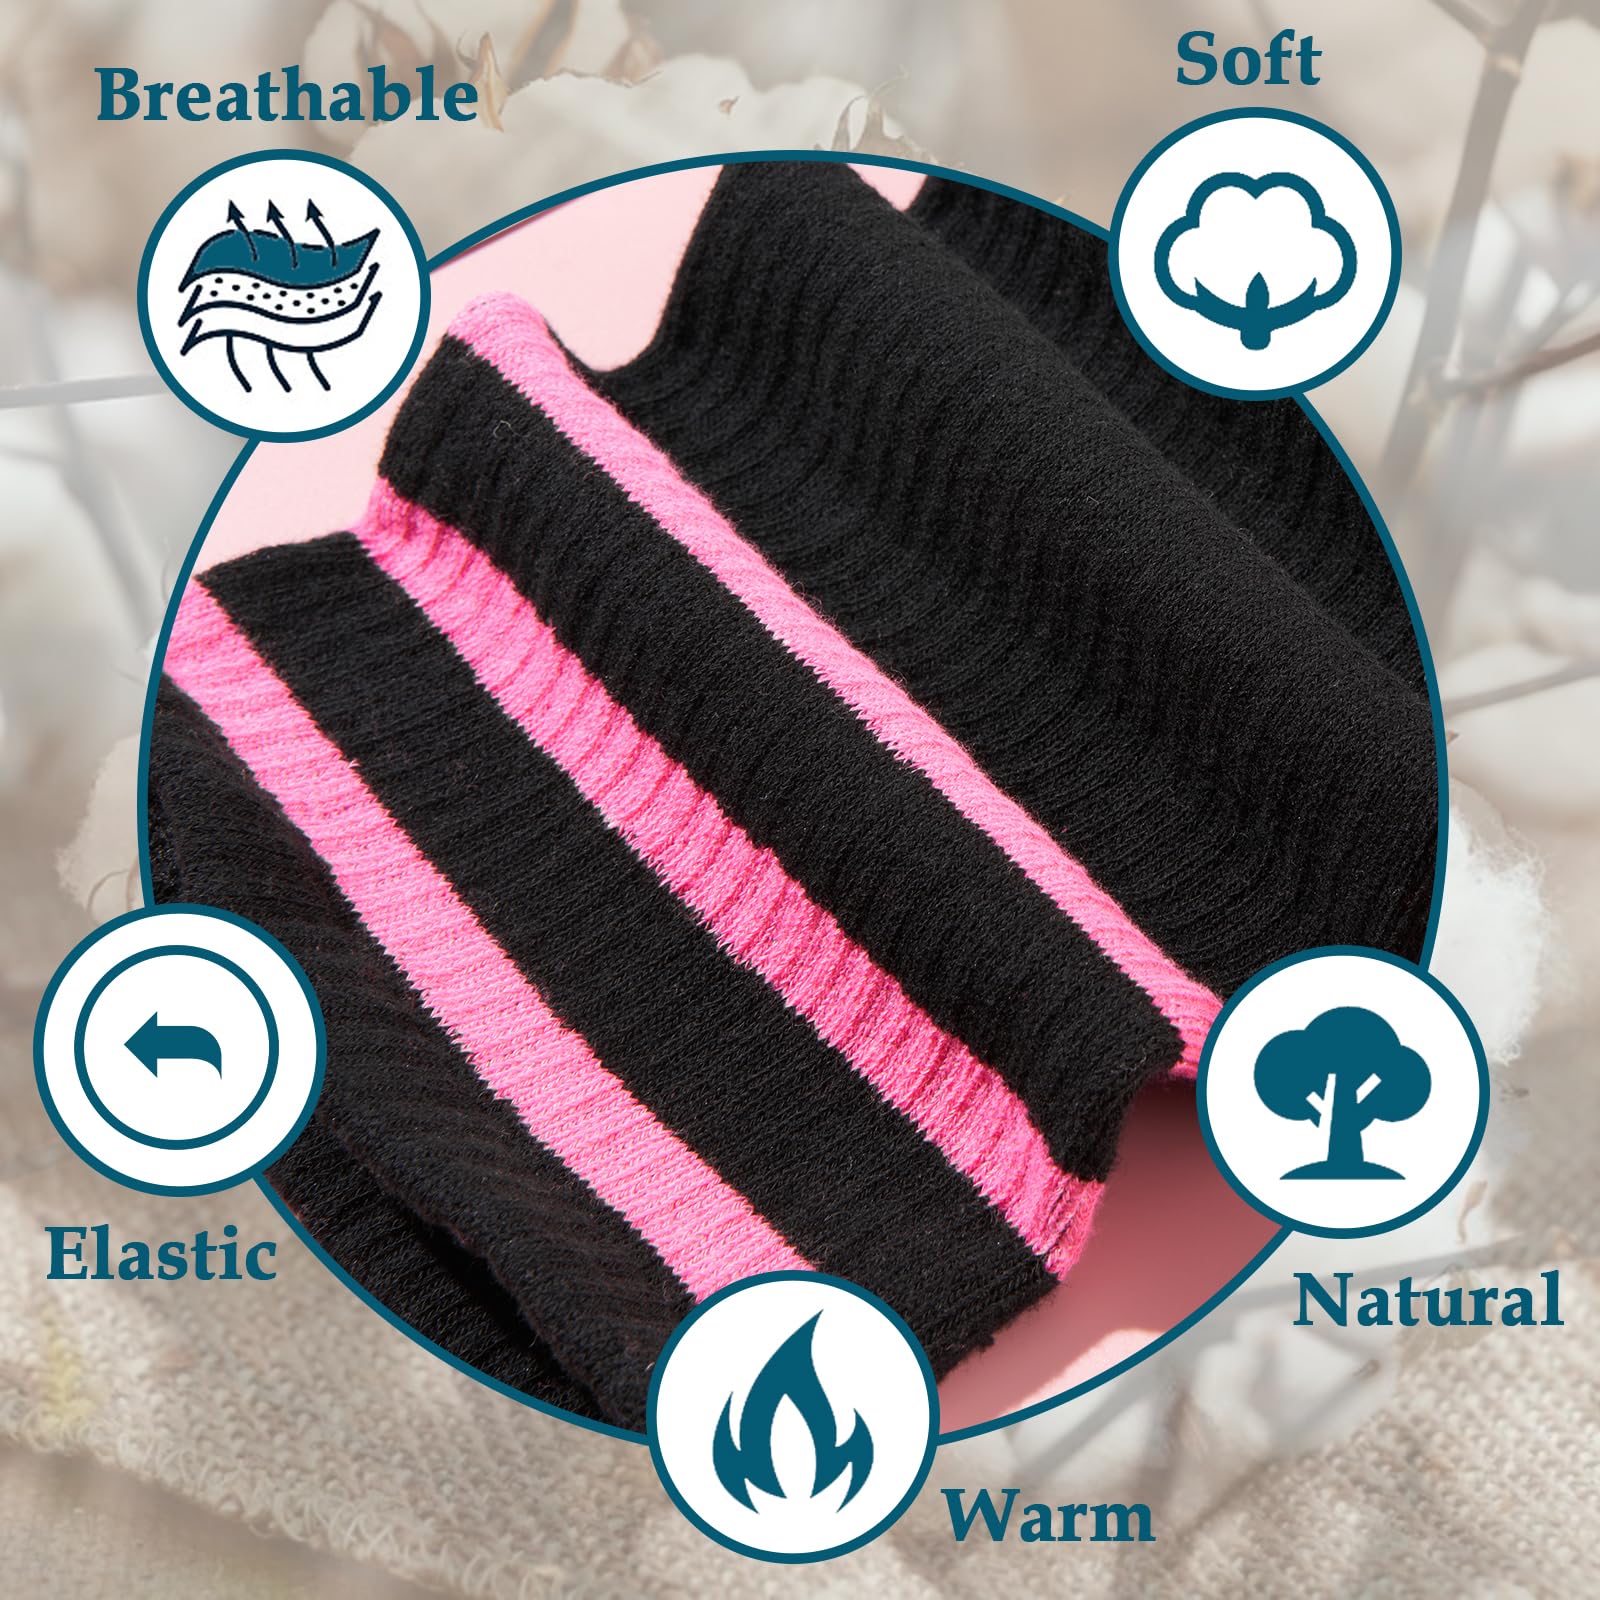 Womens Knit Cotton Extra Long Over the Knee High Socks-Black & Pink - Moon Wood